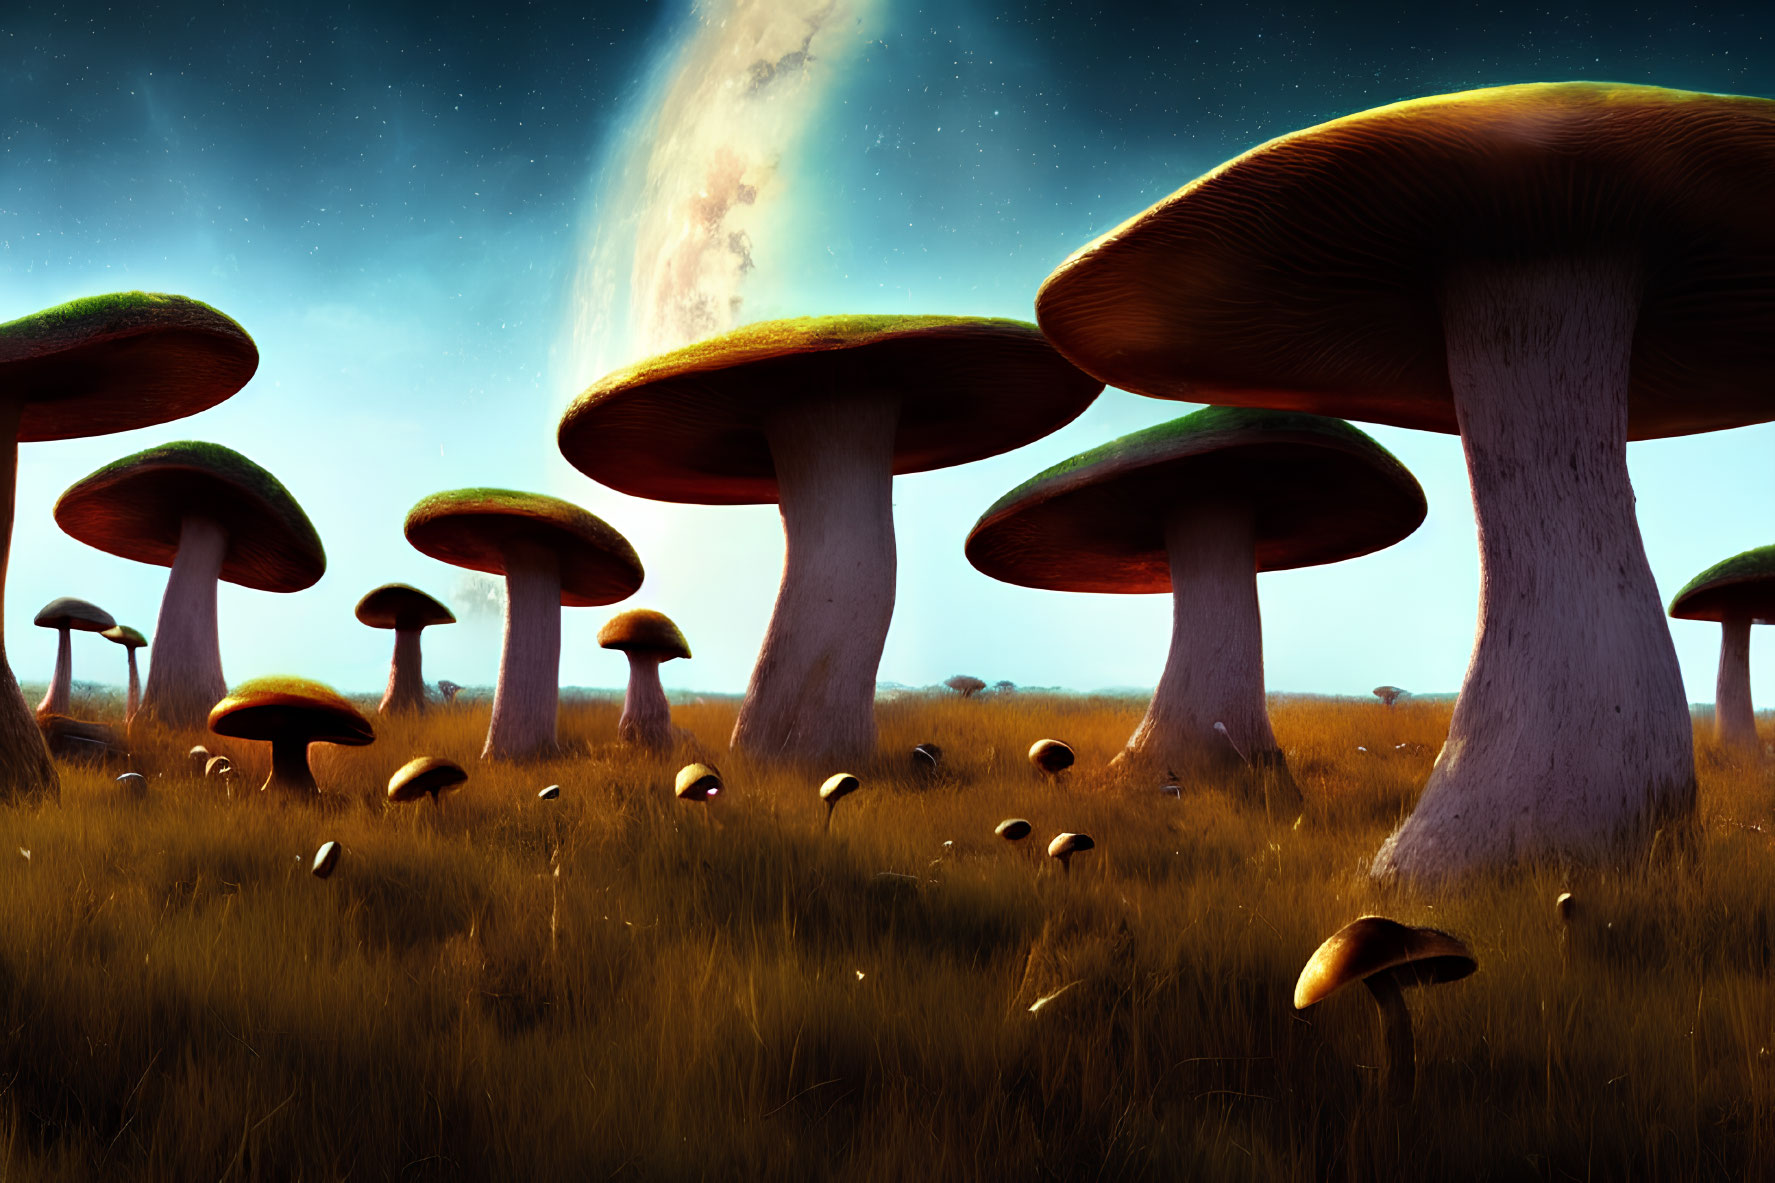 Fantastical landscape with oversized mushrooms in grassy field under galaxy sky